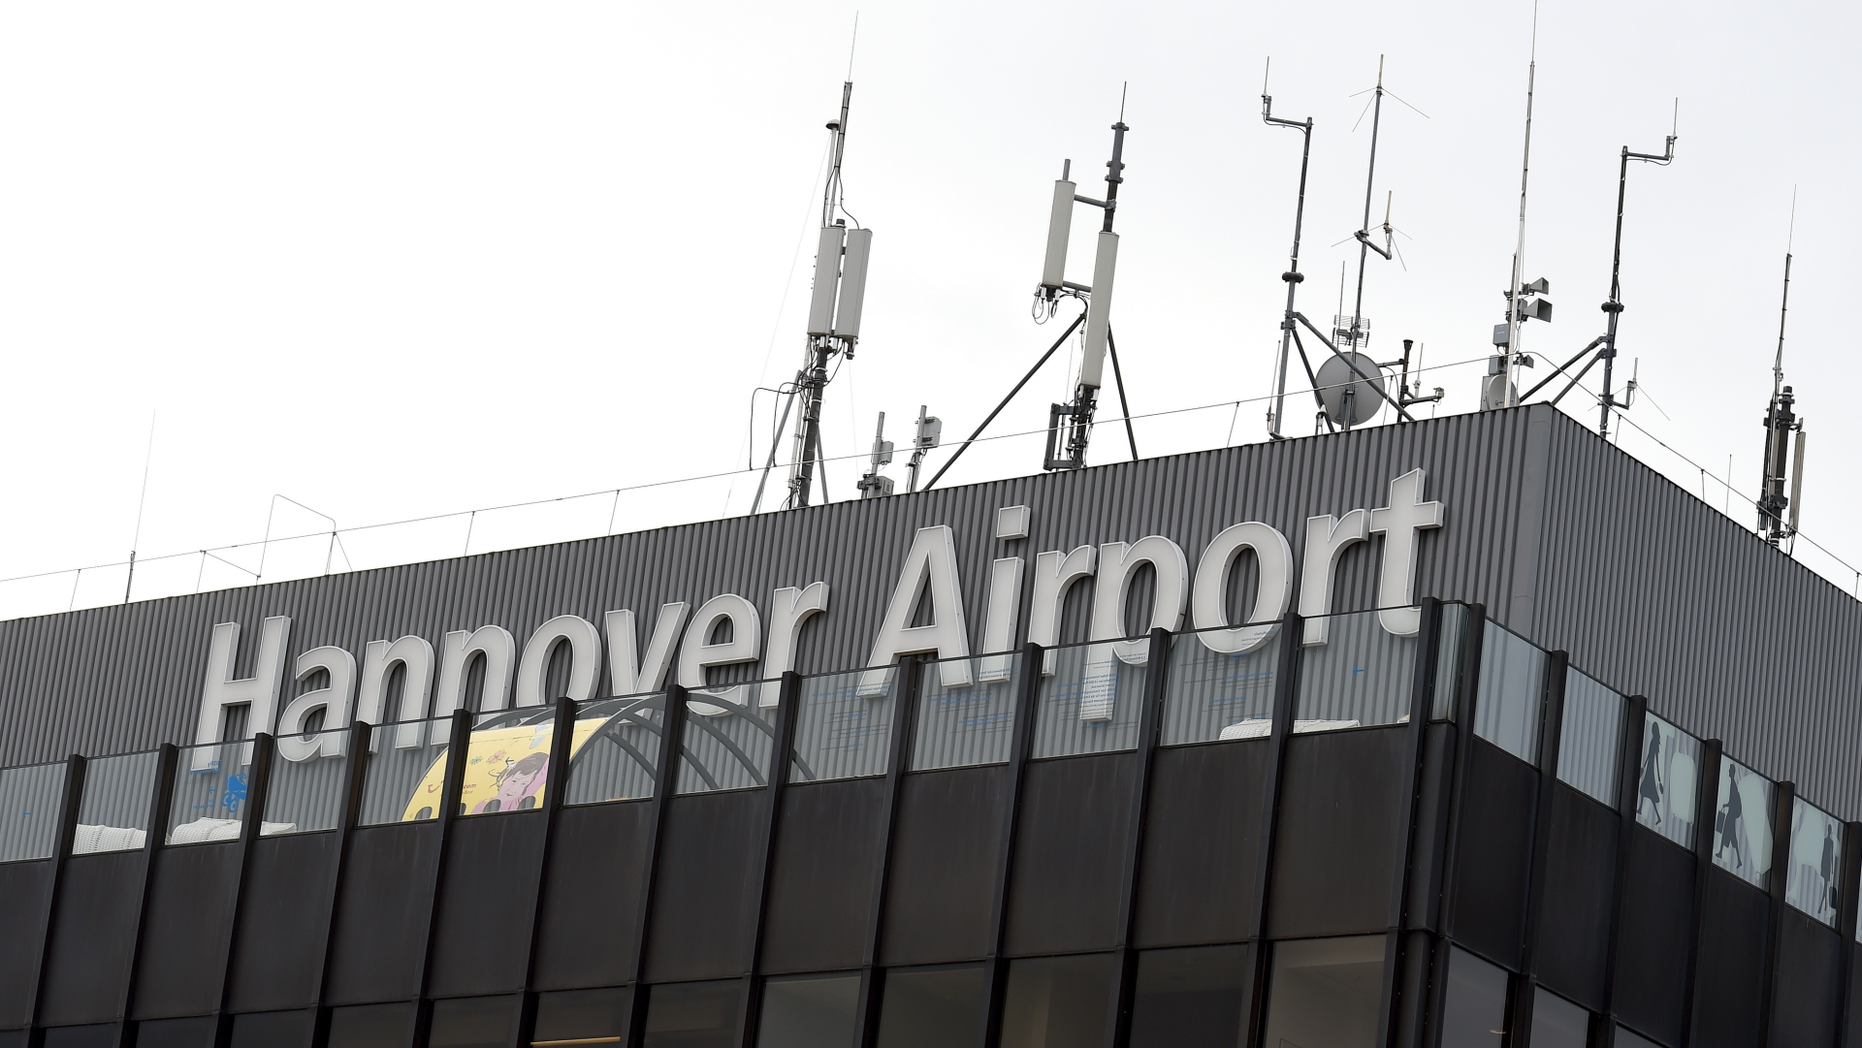 Germany: Drugged car driver tries to follow plane at airport